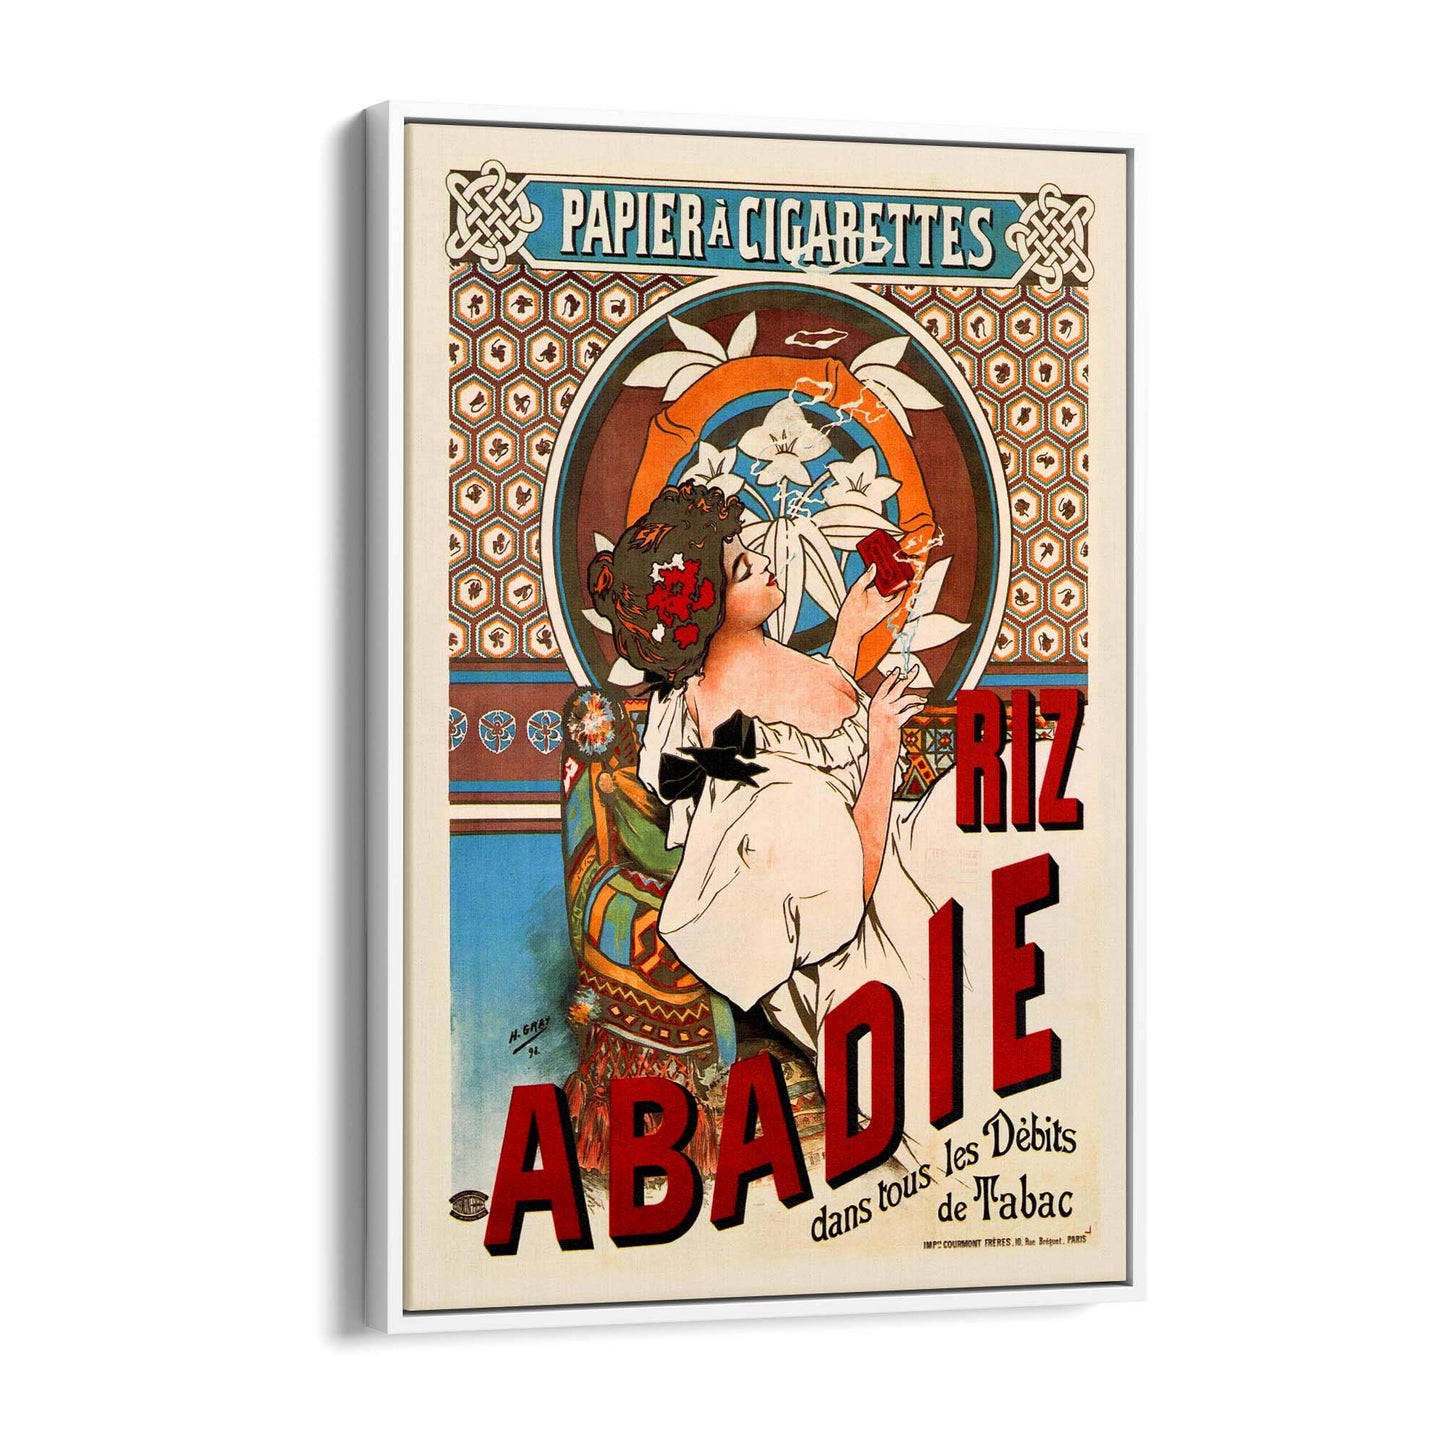 Abadie Cigarette Vintage Advert Wall Art - The Affordable Art Company